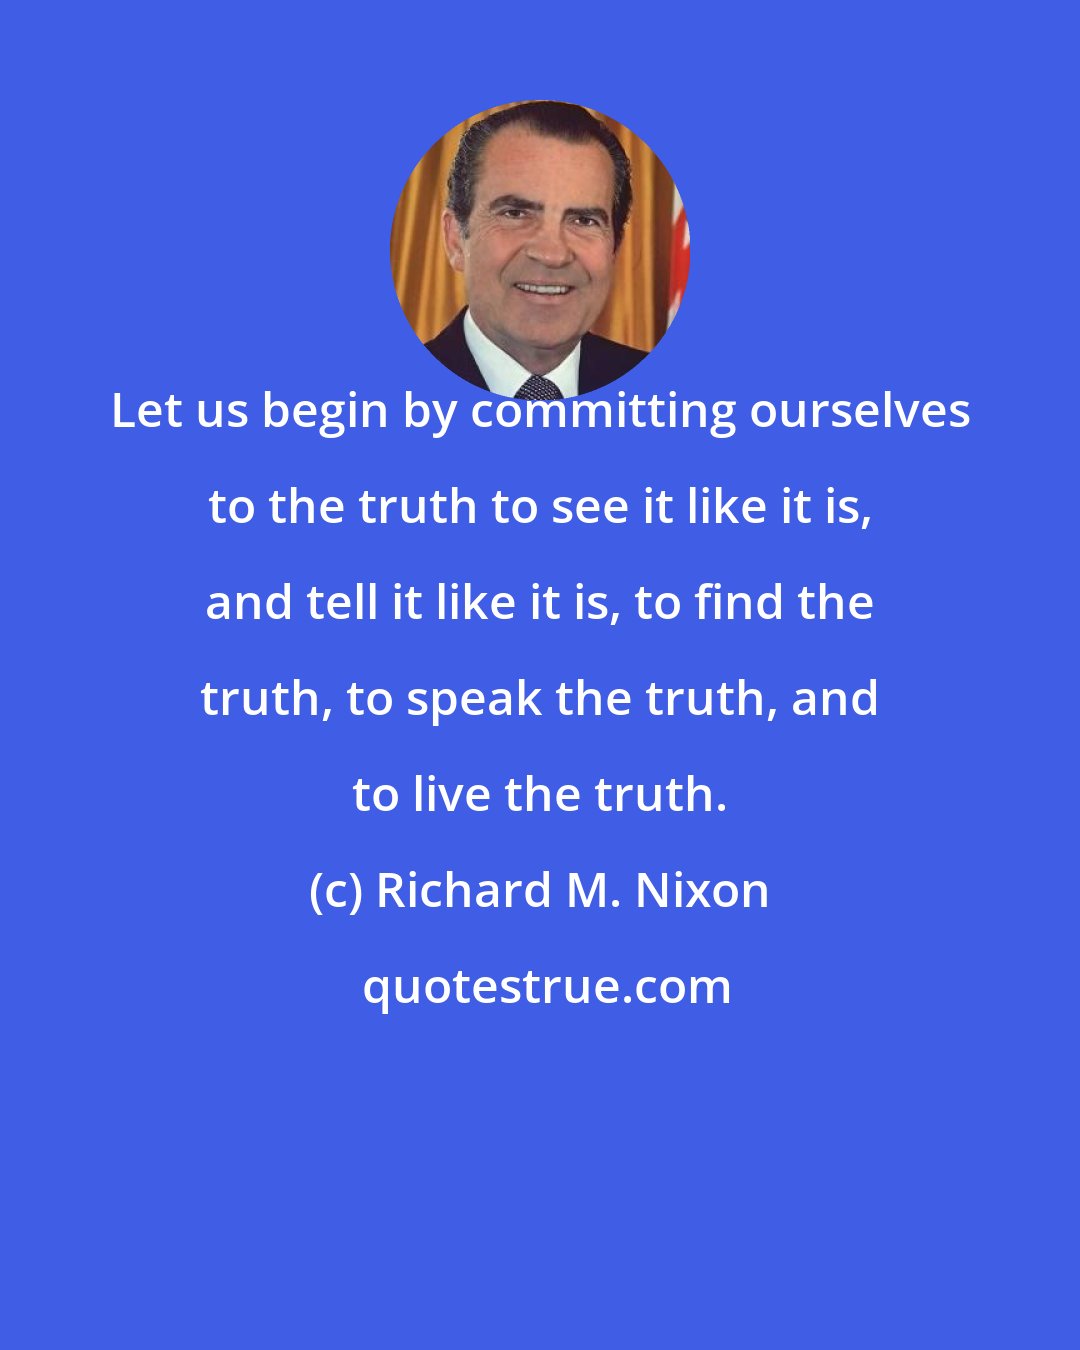 Richard M. Nixon: Let us begin by committing ourselves to the truth to see it like it is, and tell it like it is, to find the truth, to speak the truth, and to live the truth.